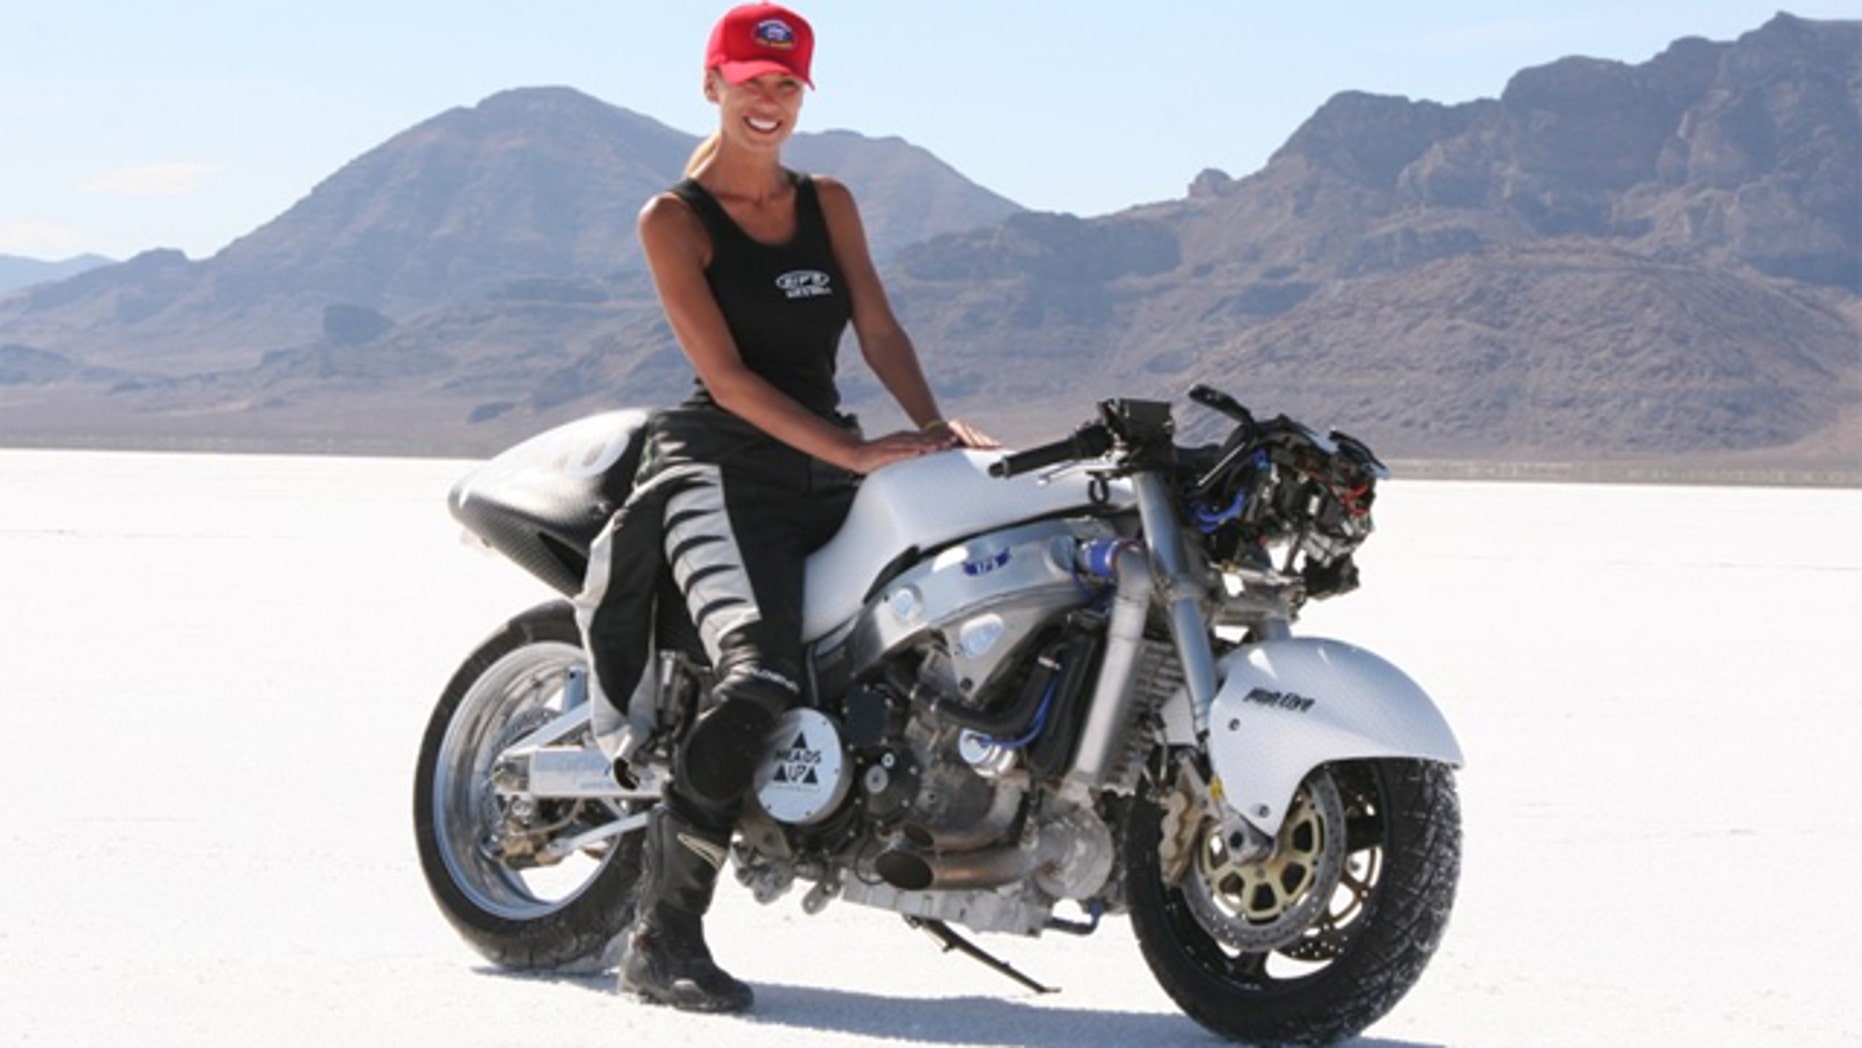 Fastest woman on two wheels has land speed record in her sights Fox News